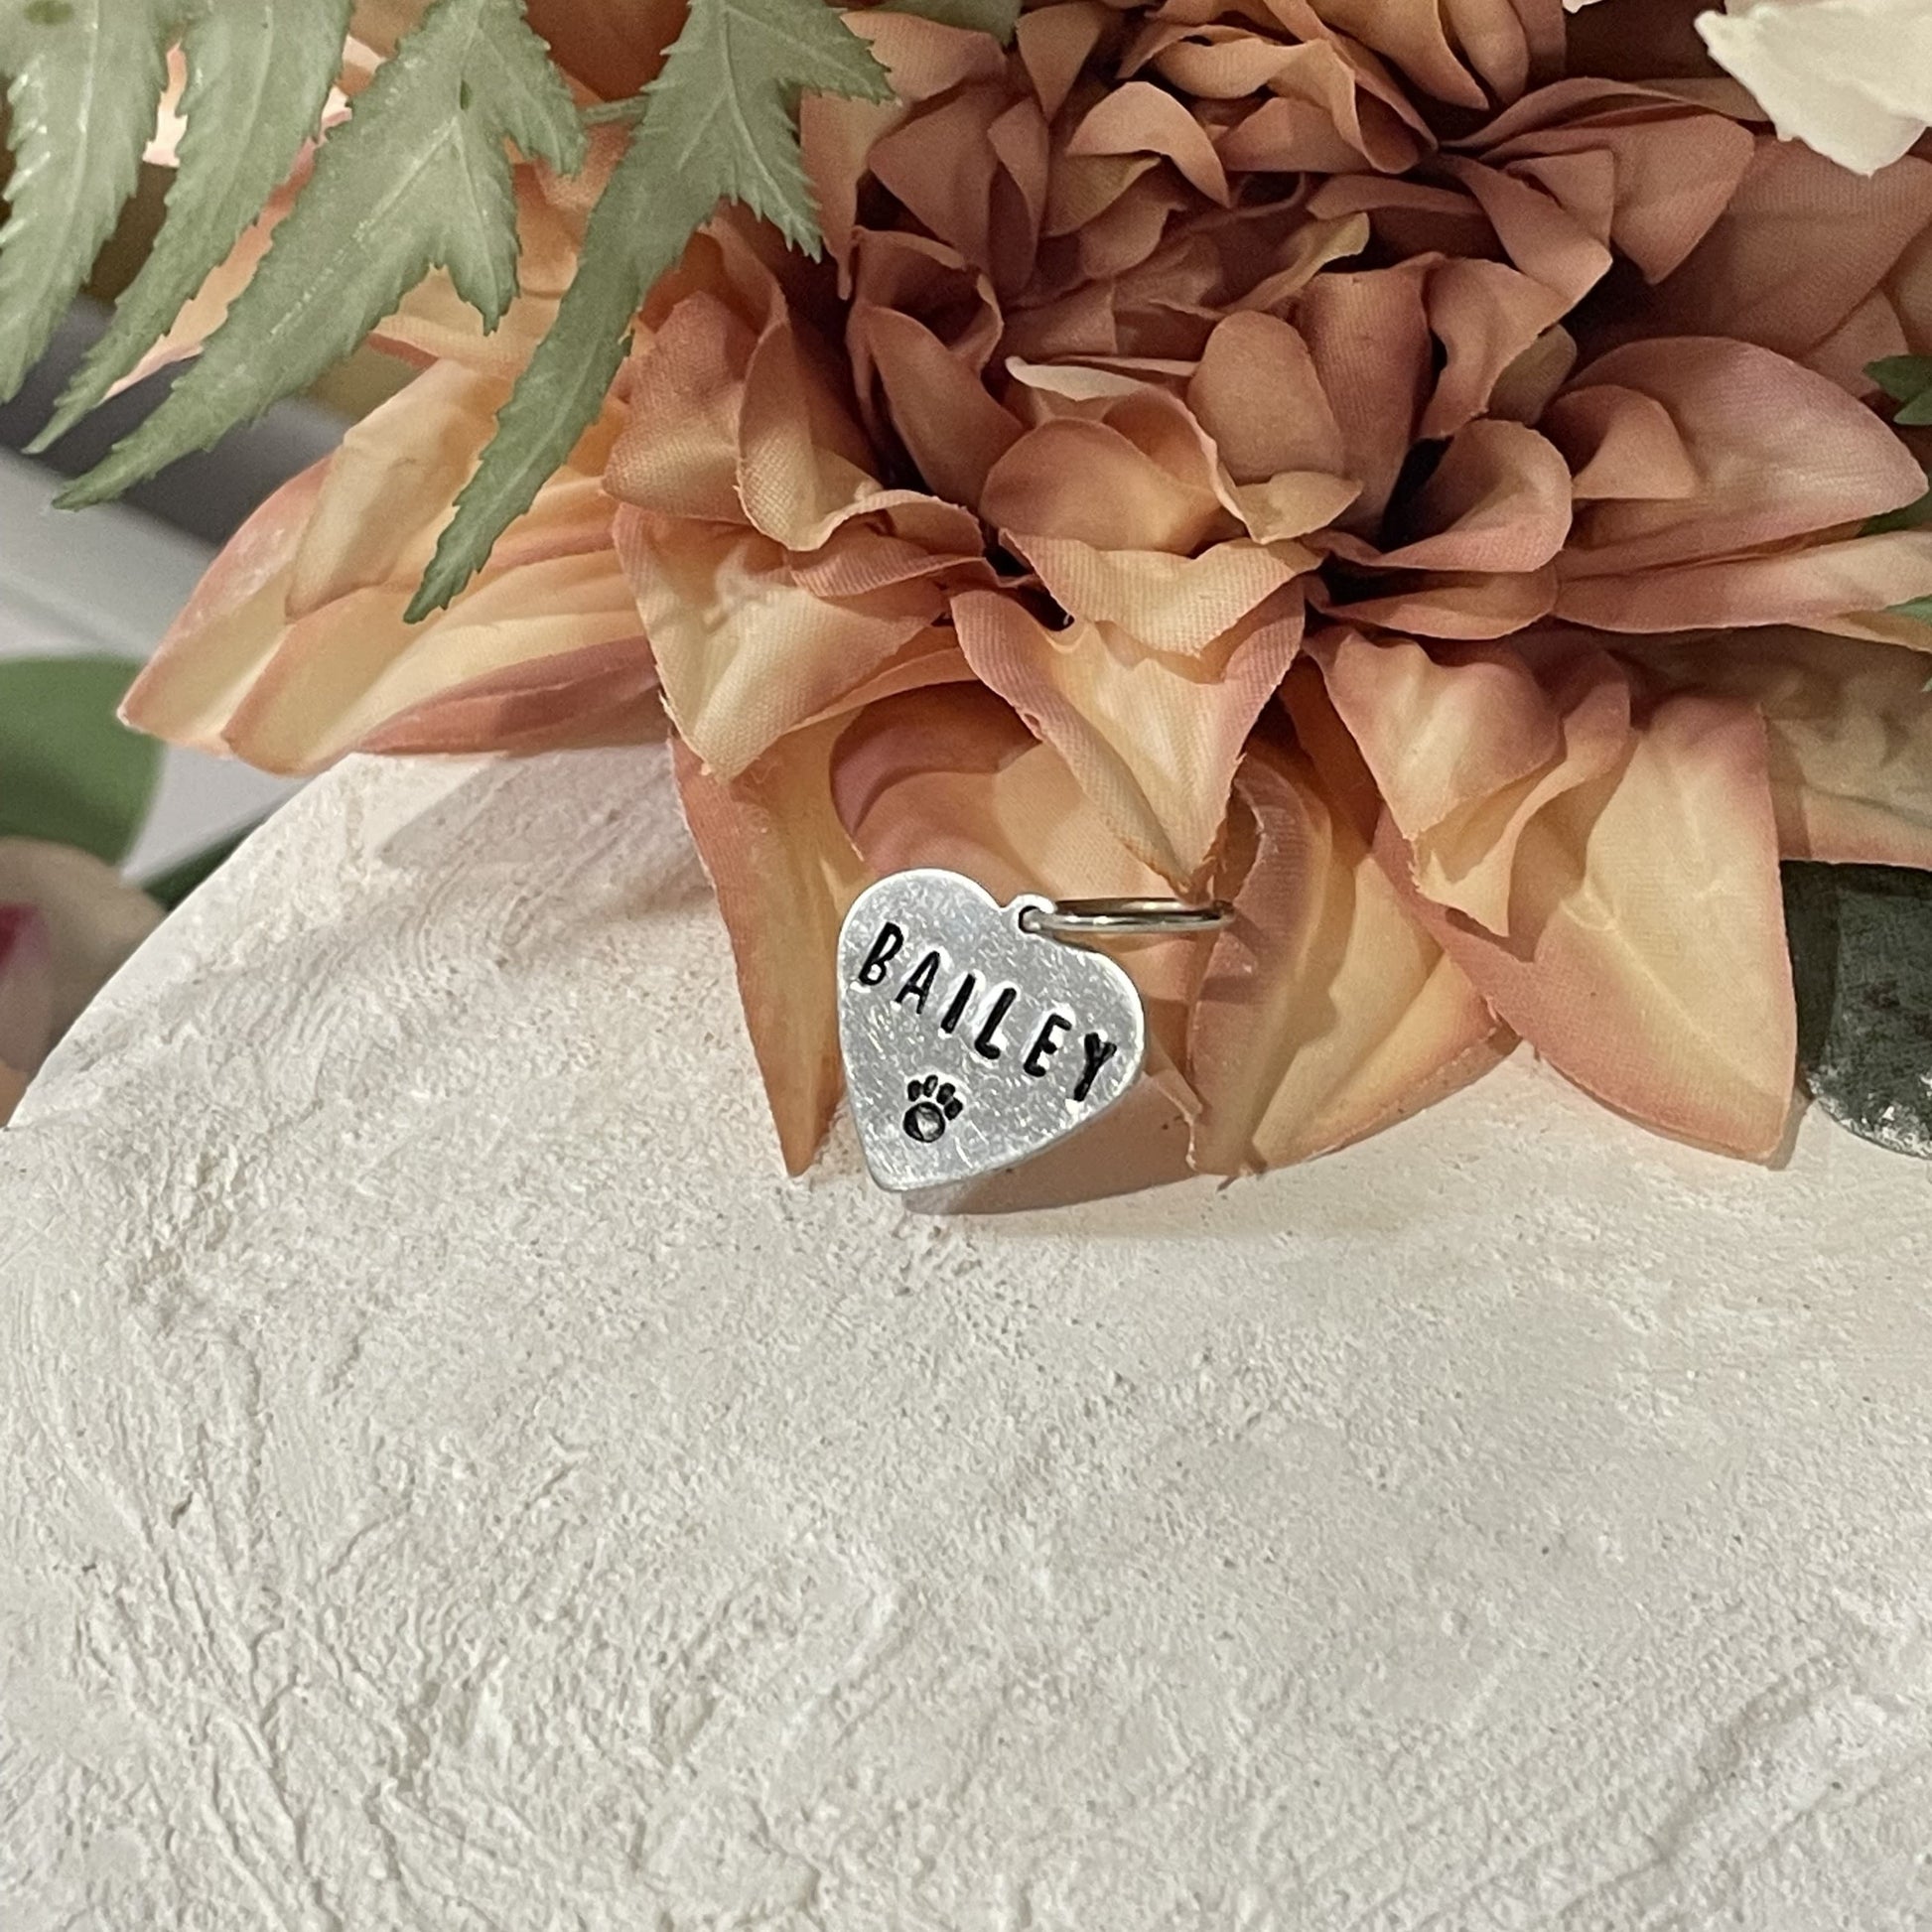 Metal hand-stamped bouquet pendant charm leaning on artificial flower, displaying the name Bailey.